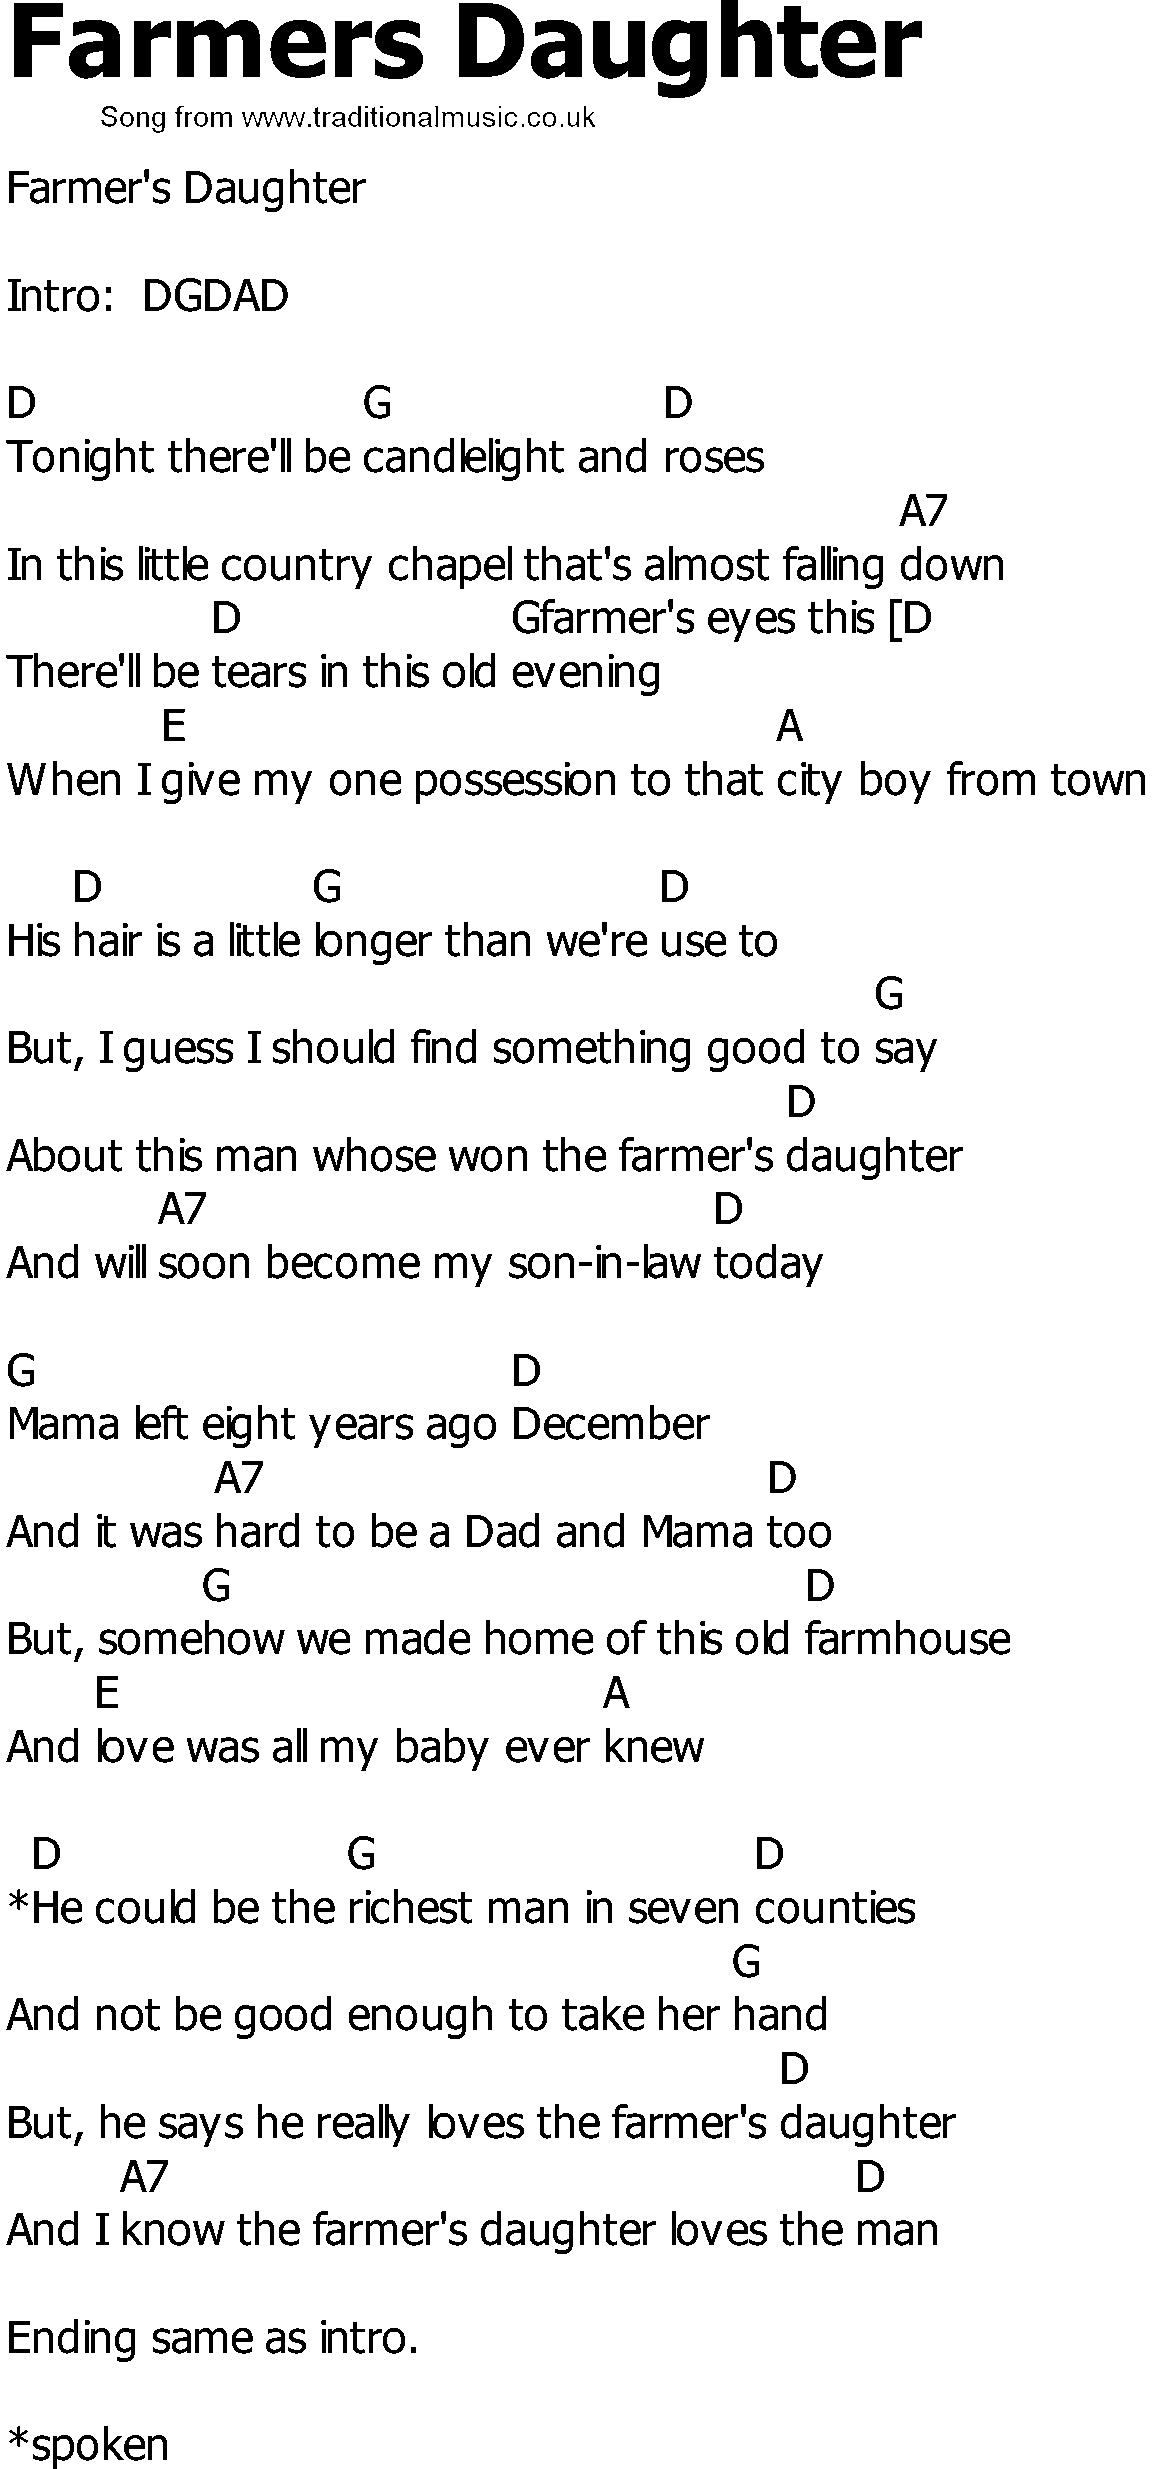 Old Country song lyrics with chords - Farmers Daughter